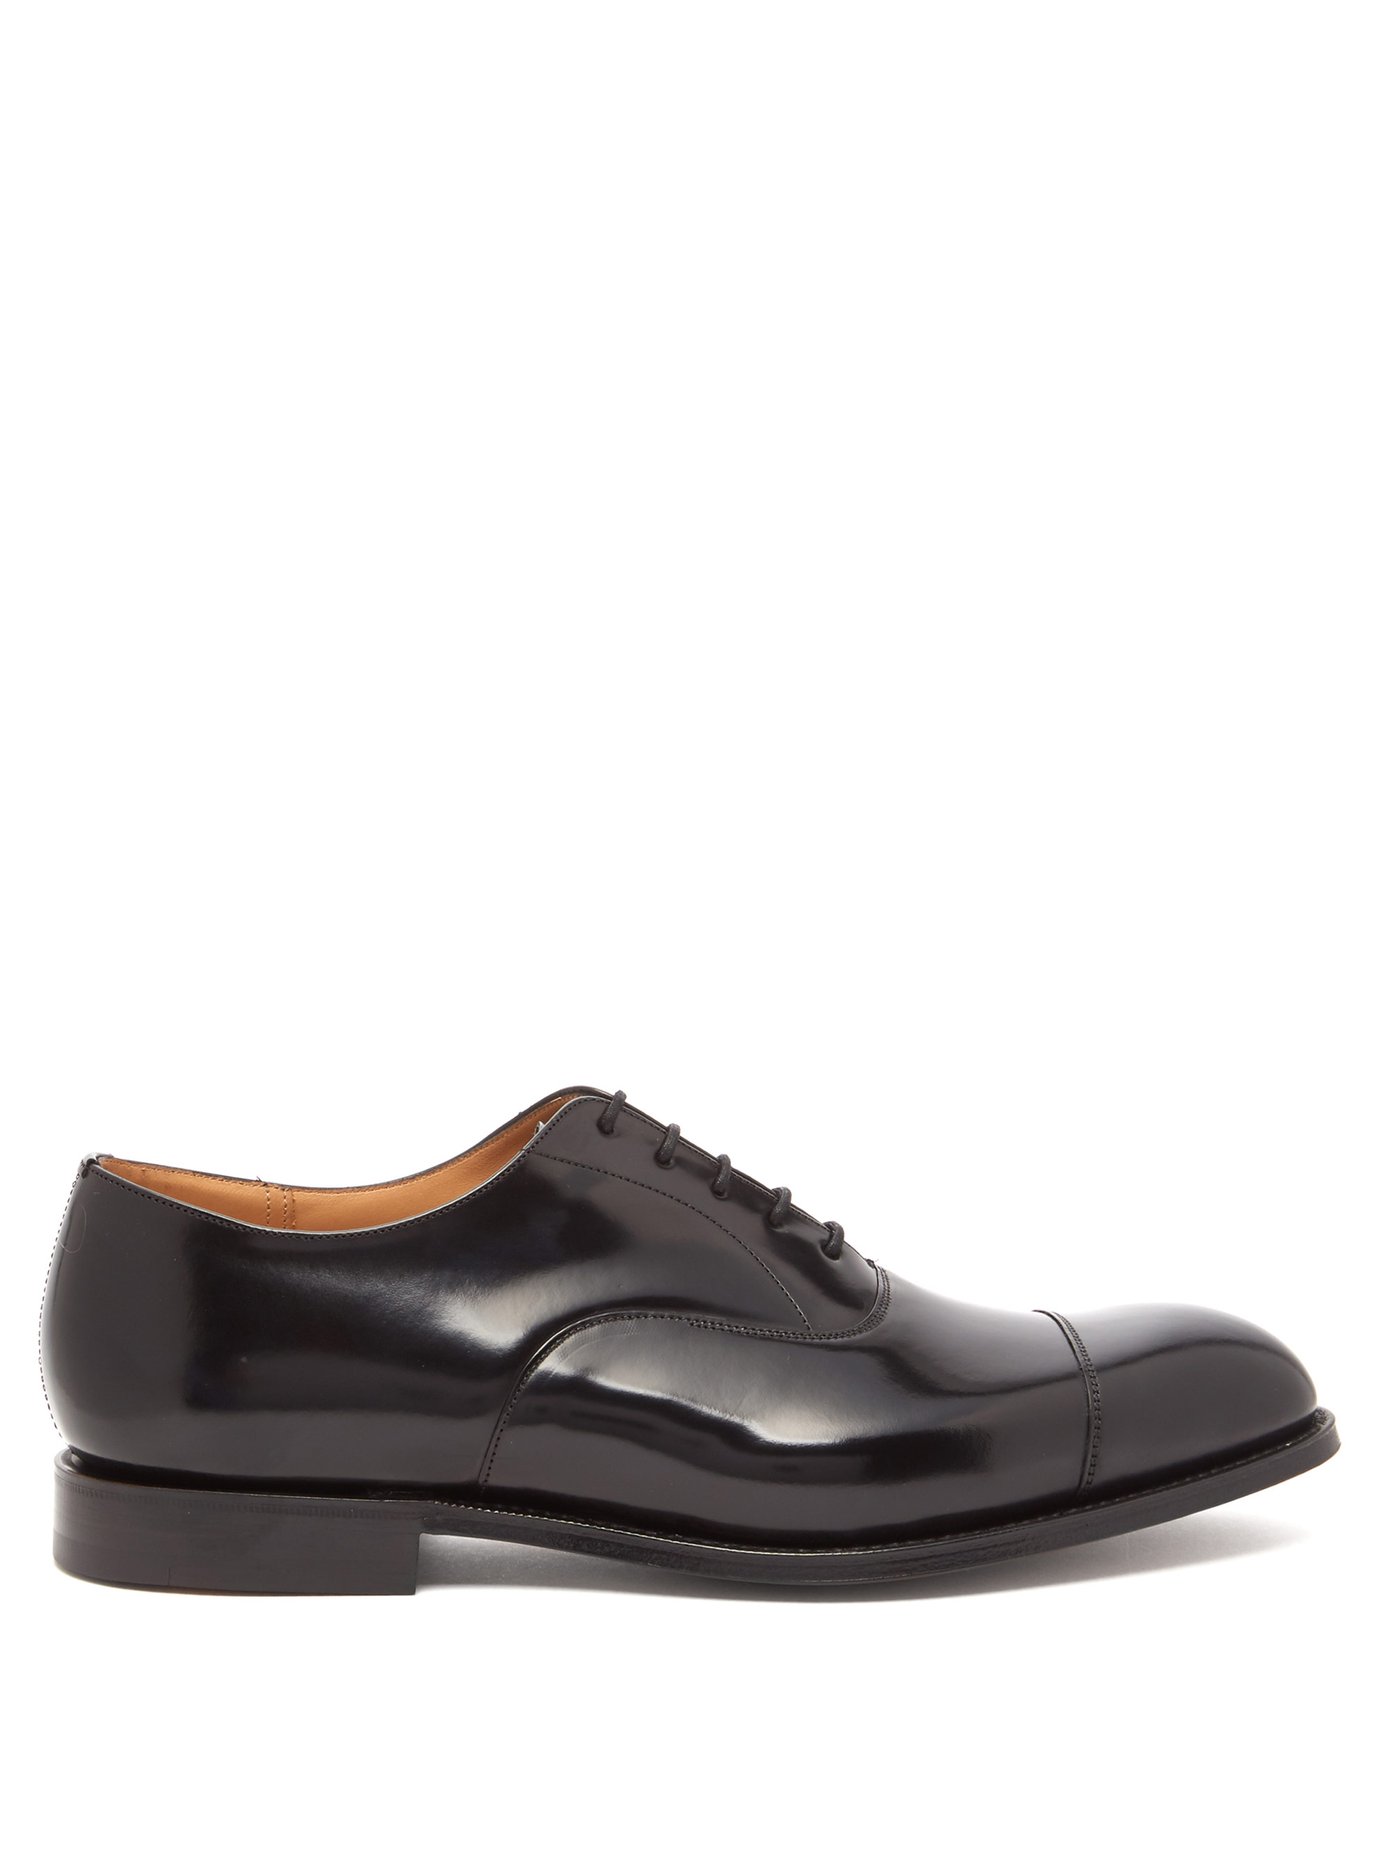 Consul leather oxford shoes | Church's 